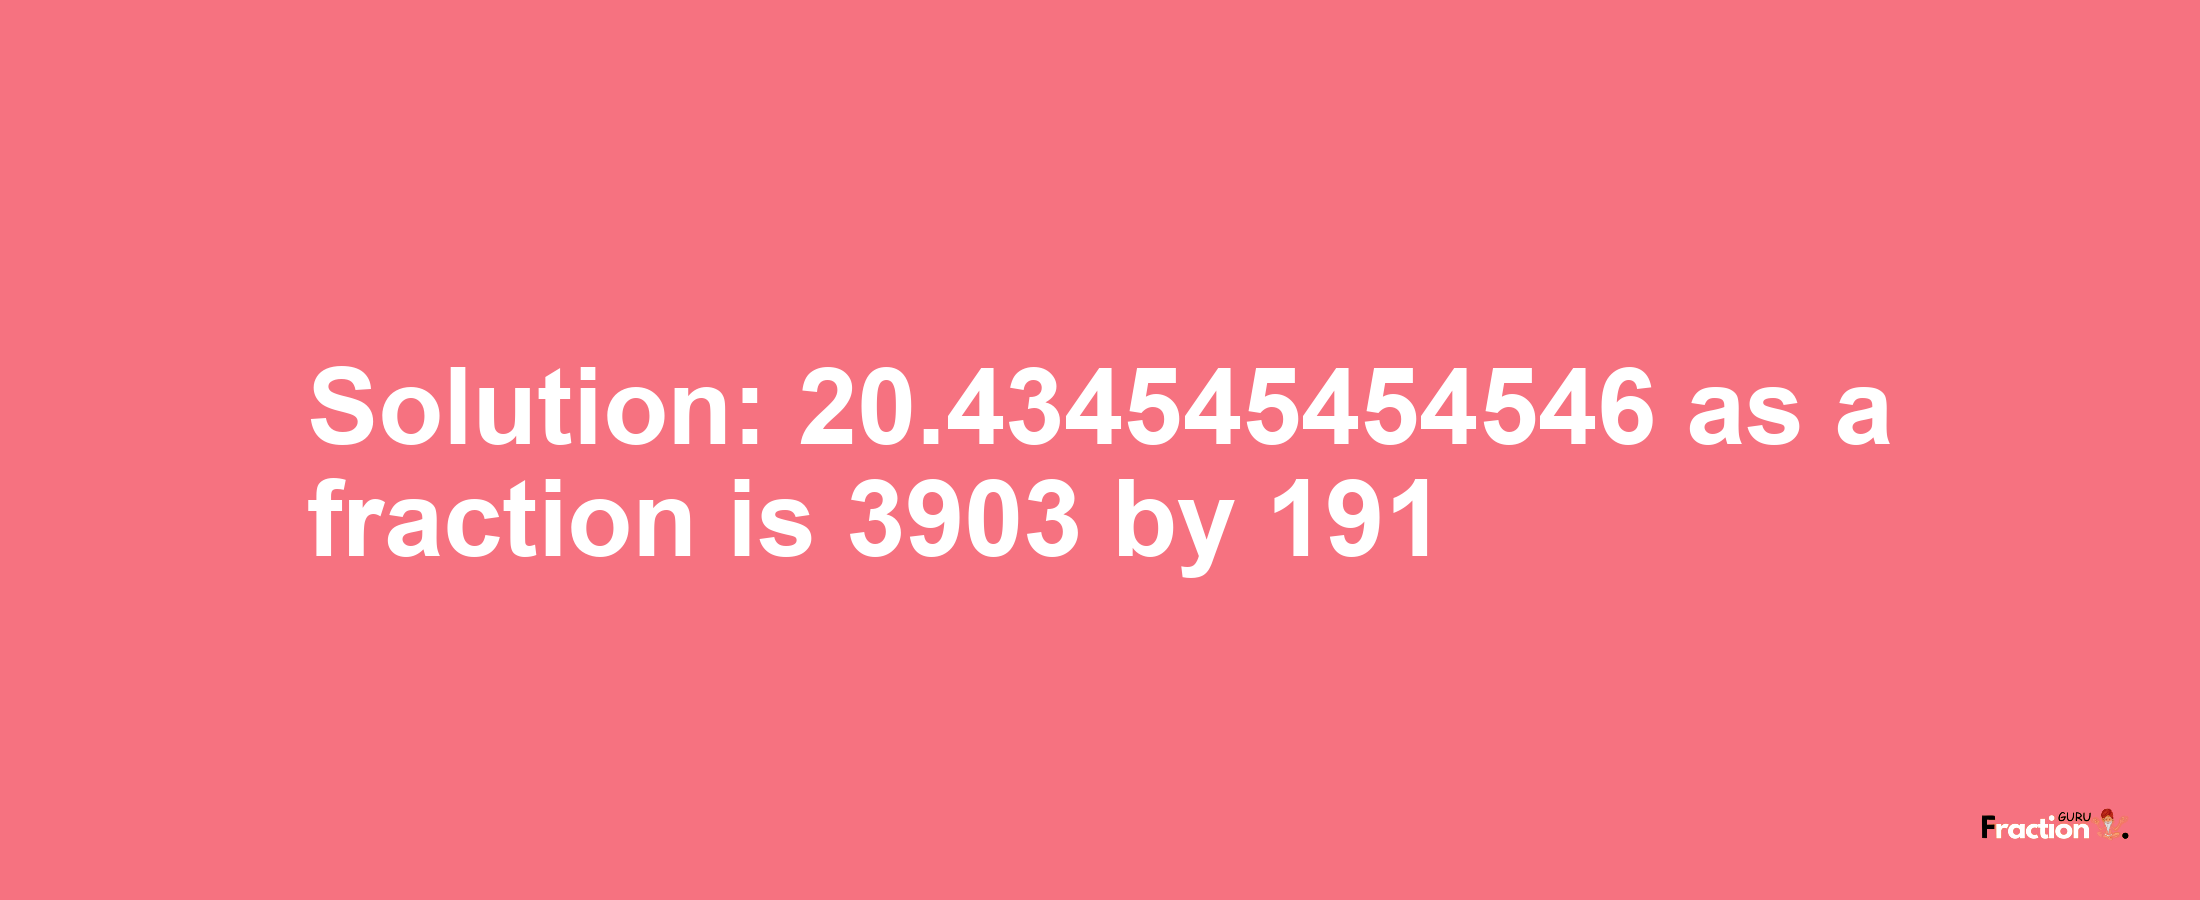 Solution:20.434545454546 as a fraction is 3903/191